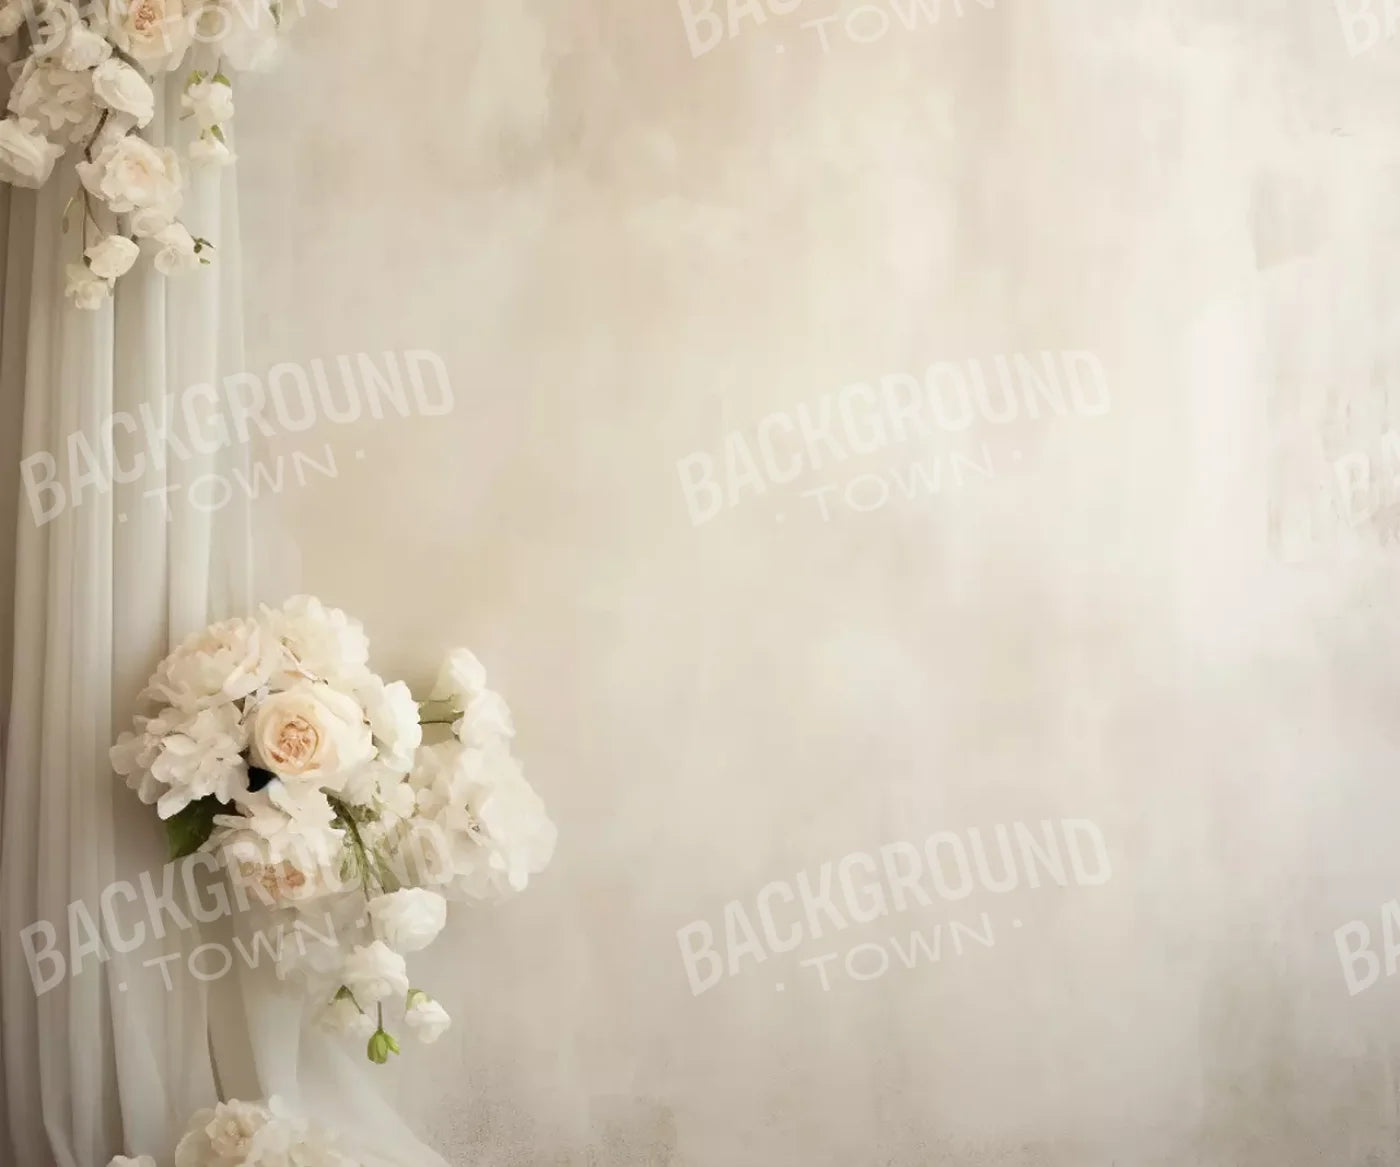 Plaster Wall With Florals 12’X10’ Ultracloth (144 X 120 Inch) Backdrop